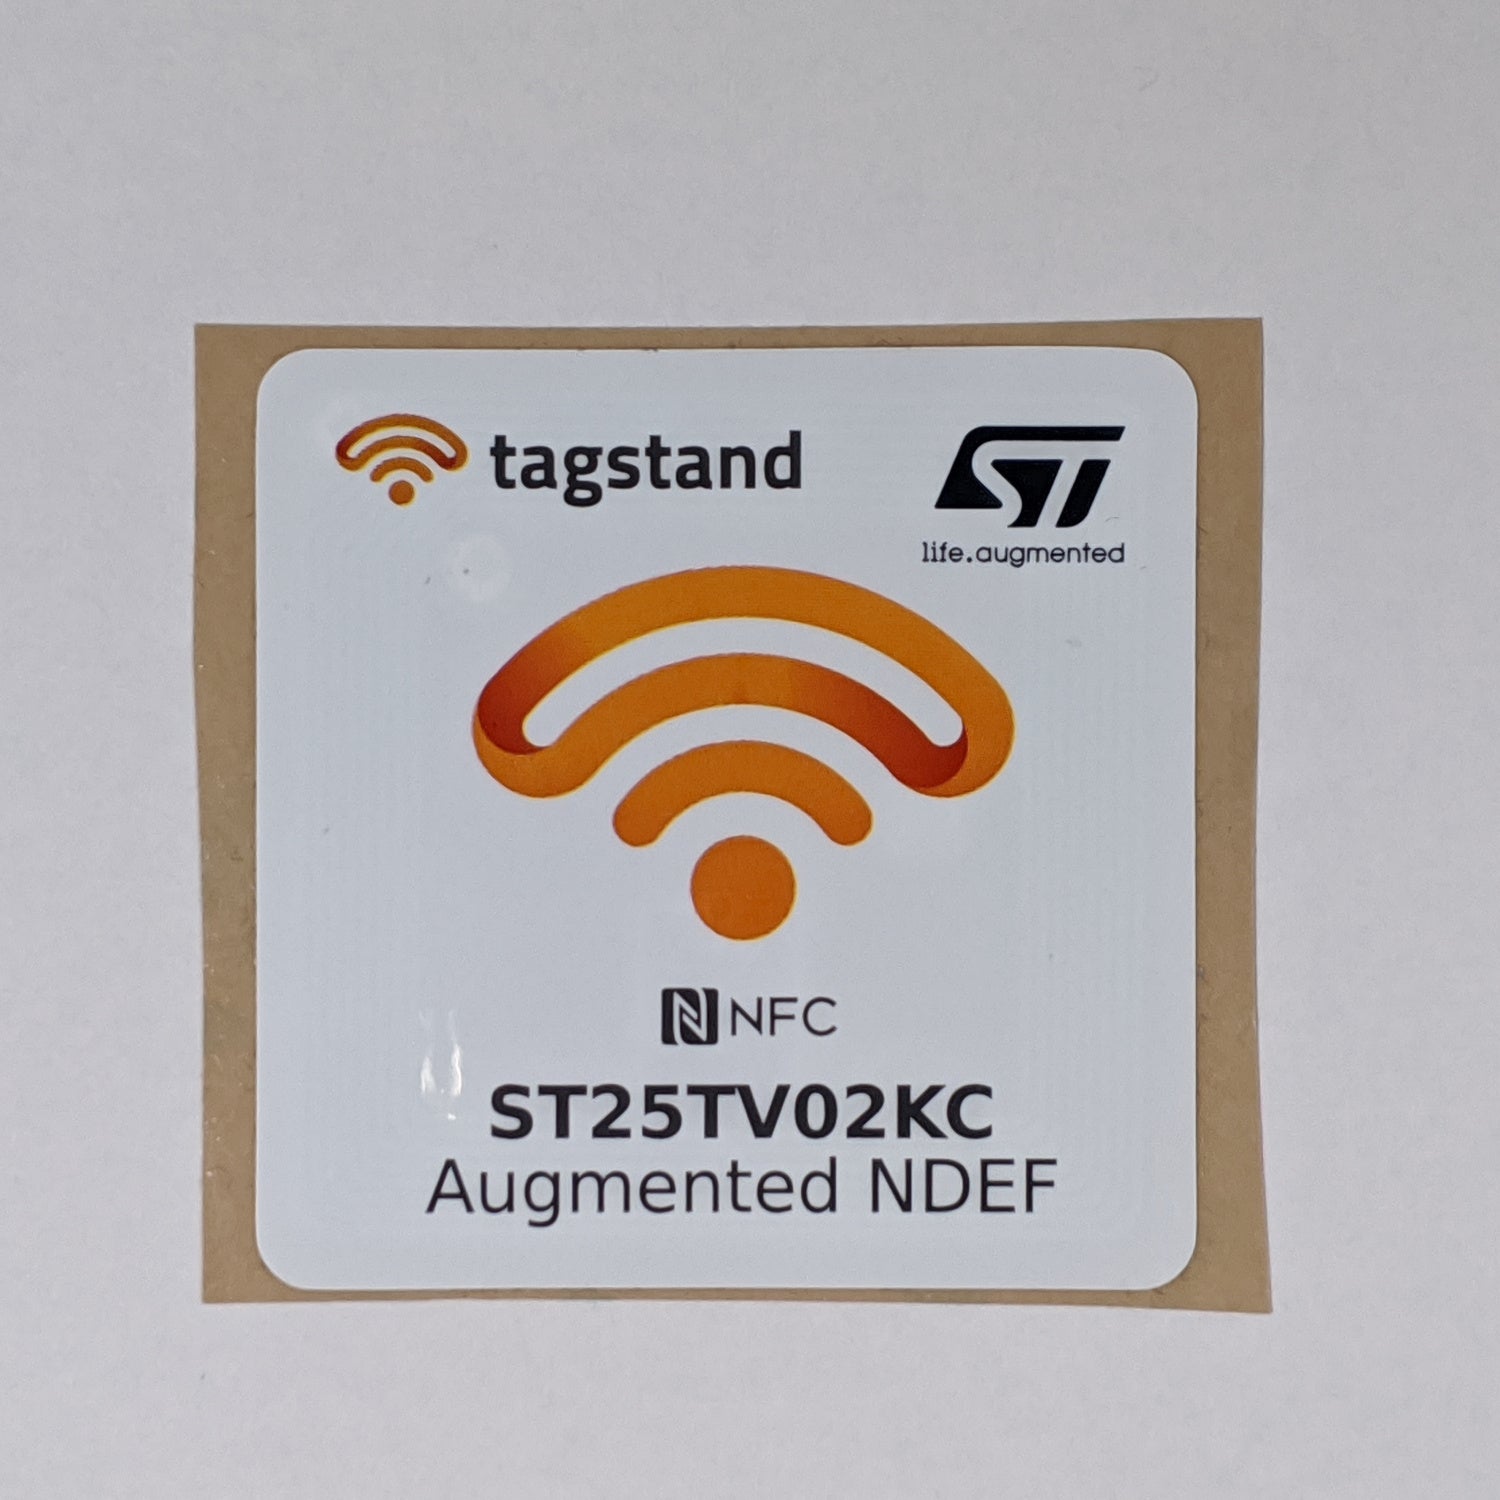 ST25TV02KC - Augmented ANDEF NFC Sticker- 50x50mm